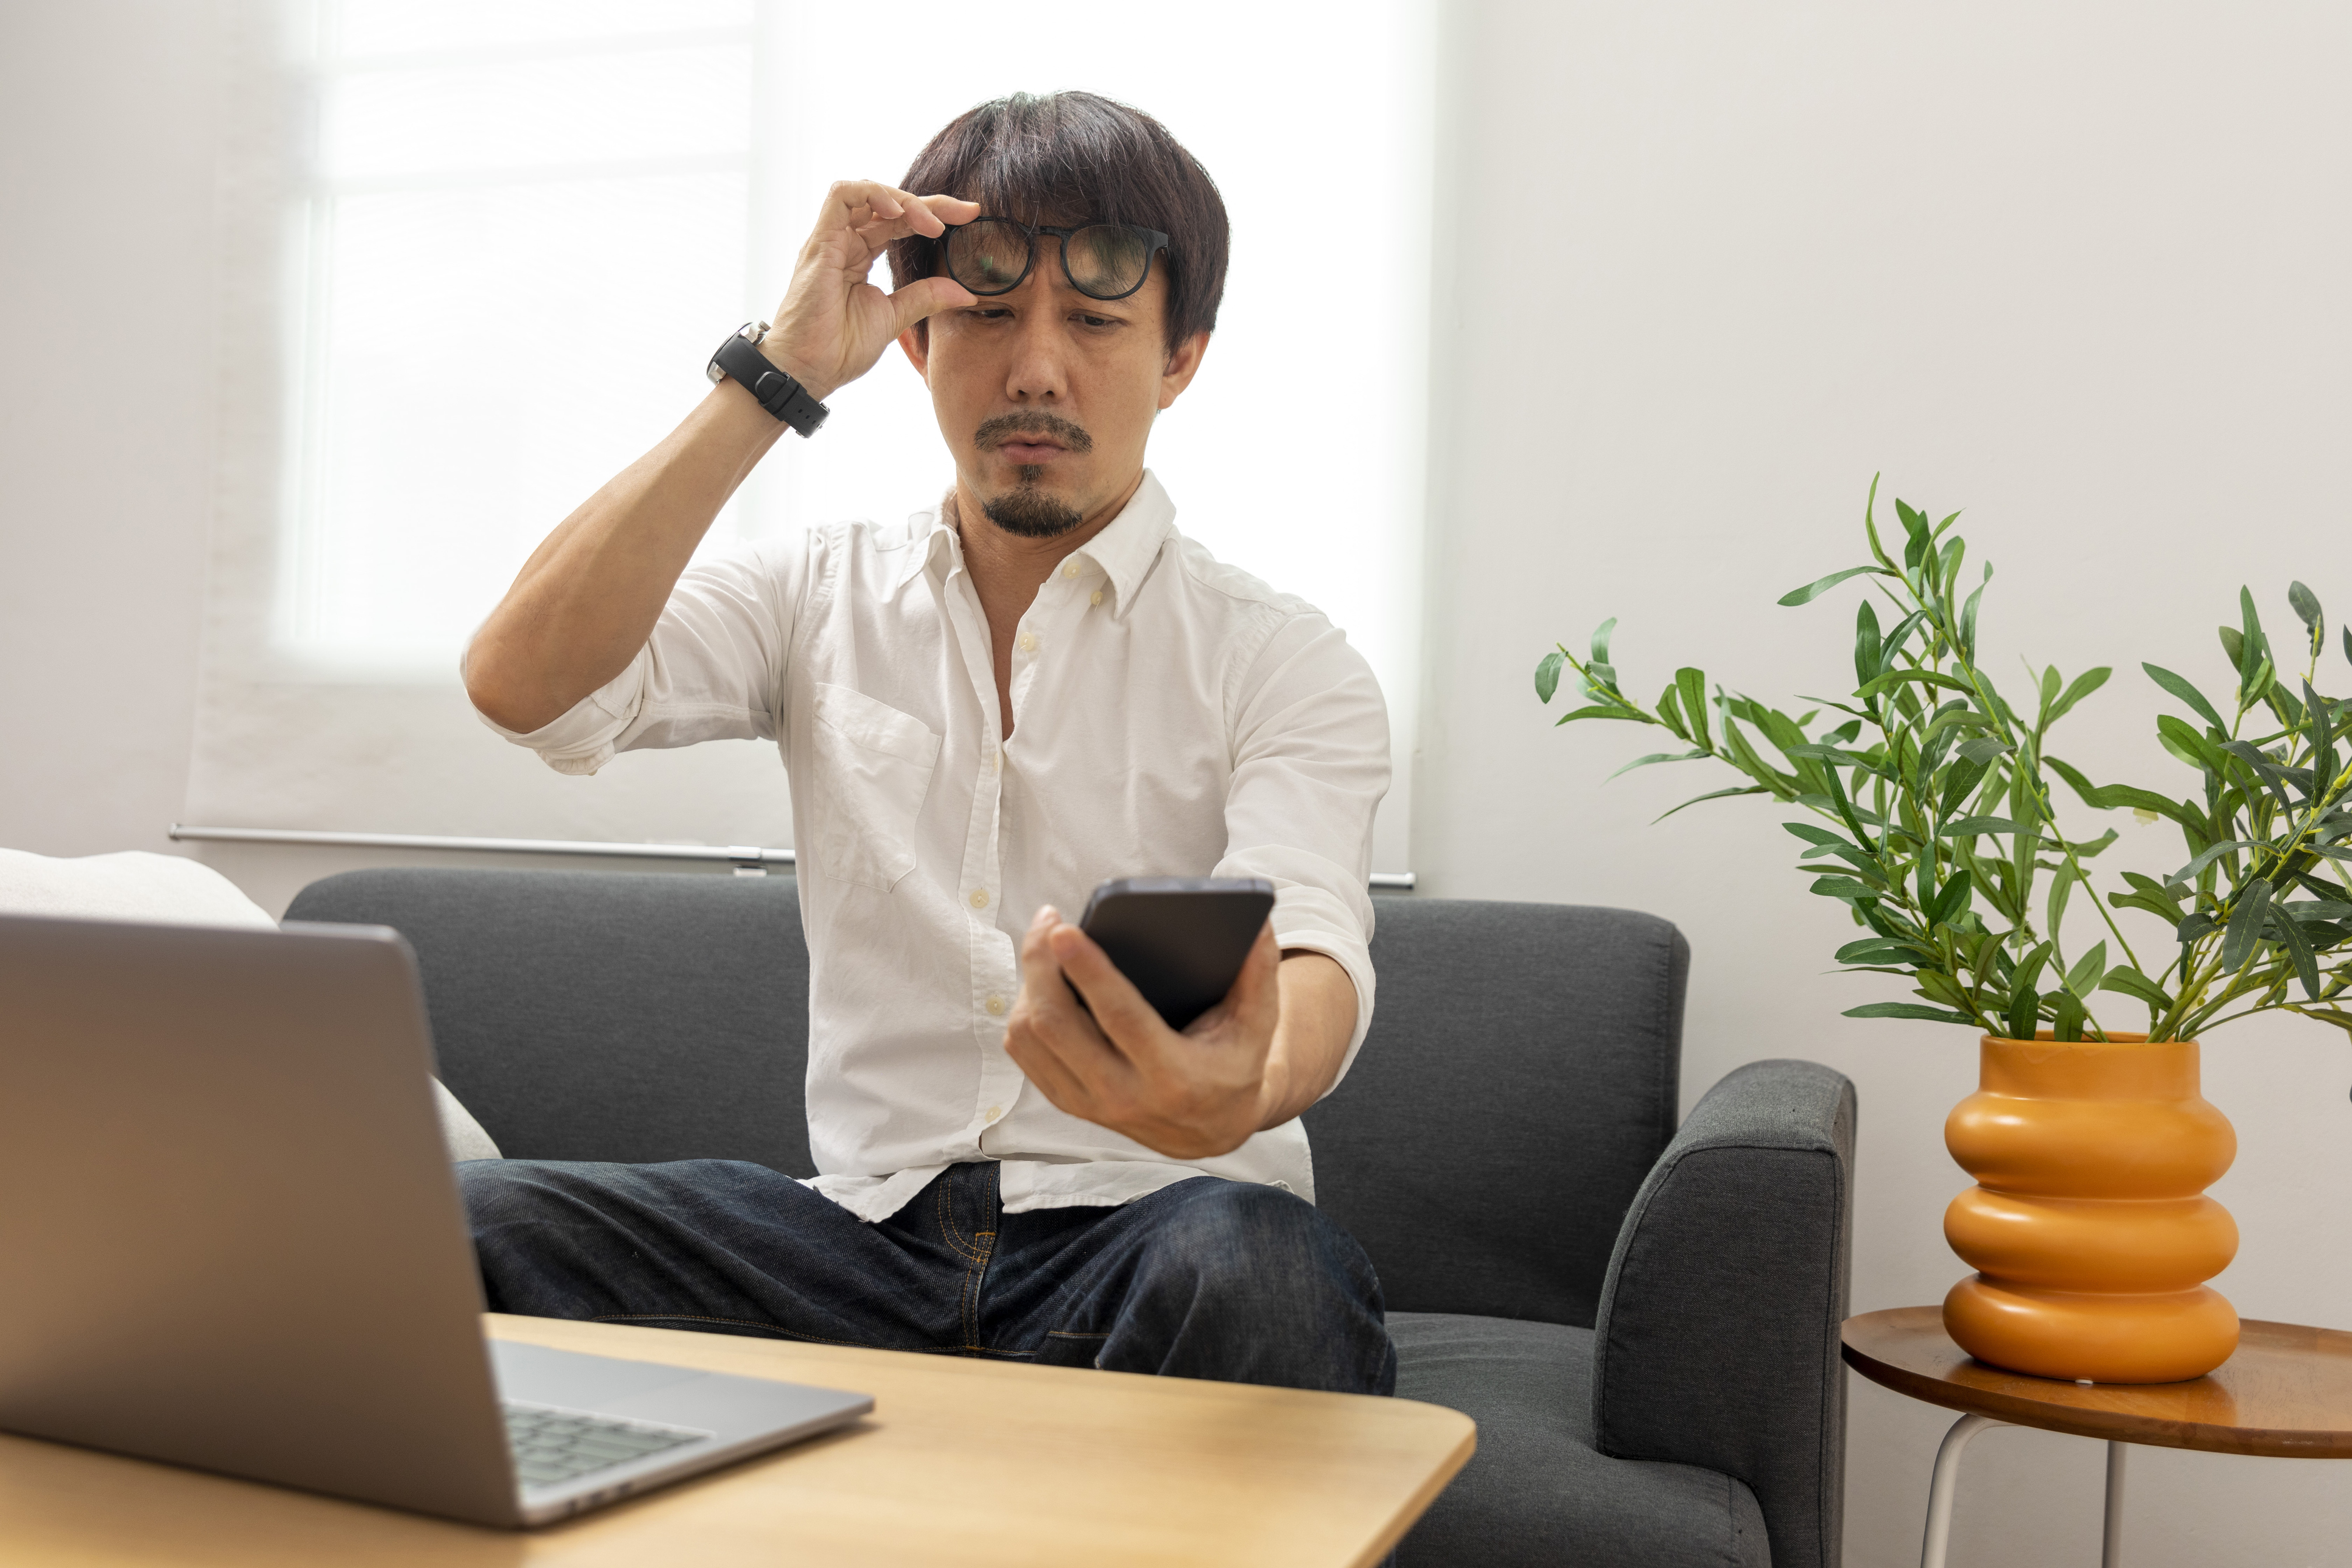 Asian man sits on a couch as he works from home, moving his glasses to adjust his eyes